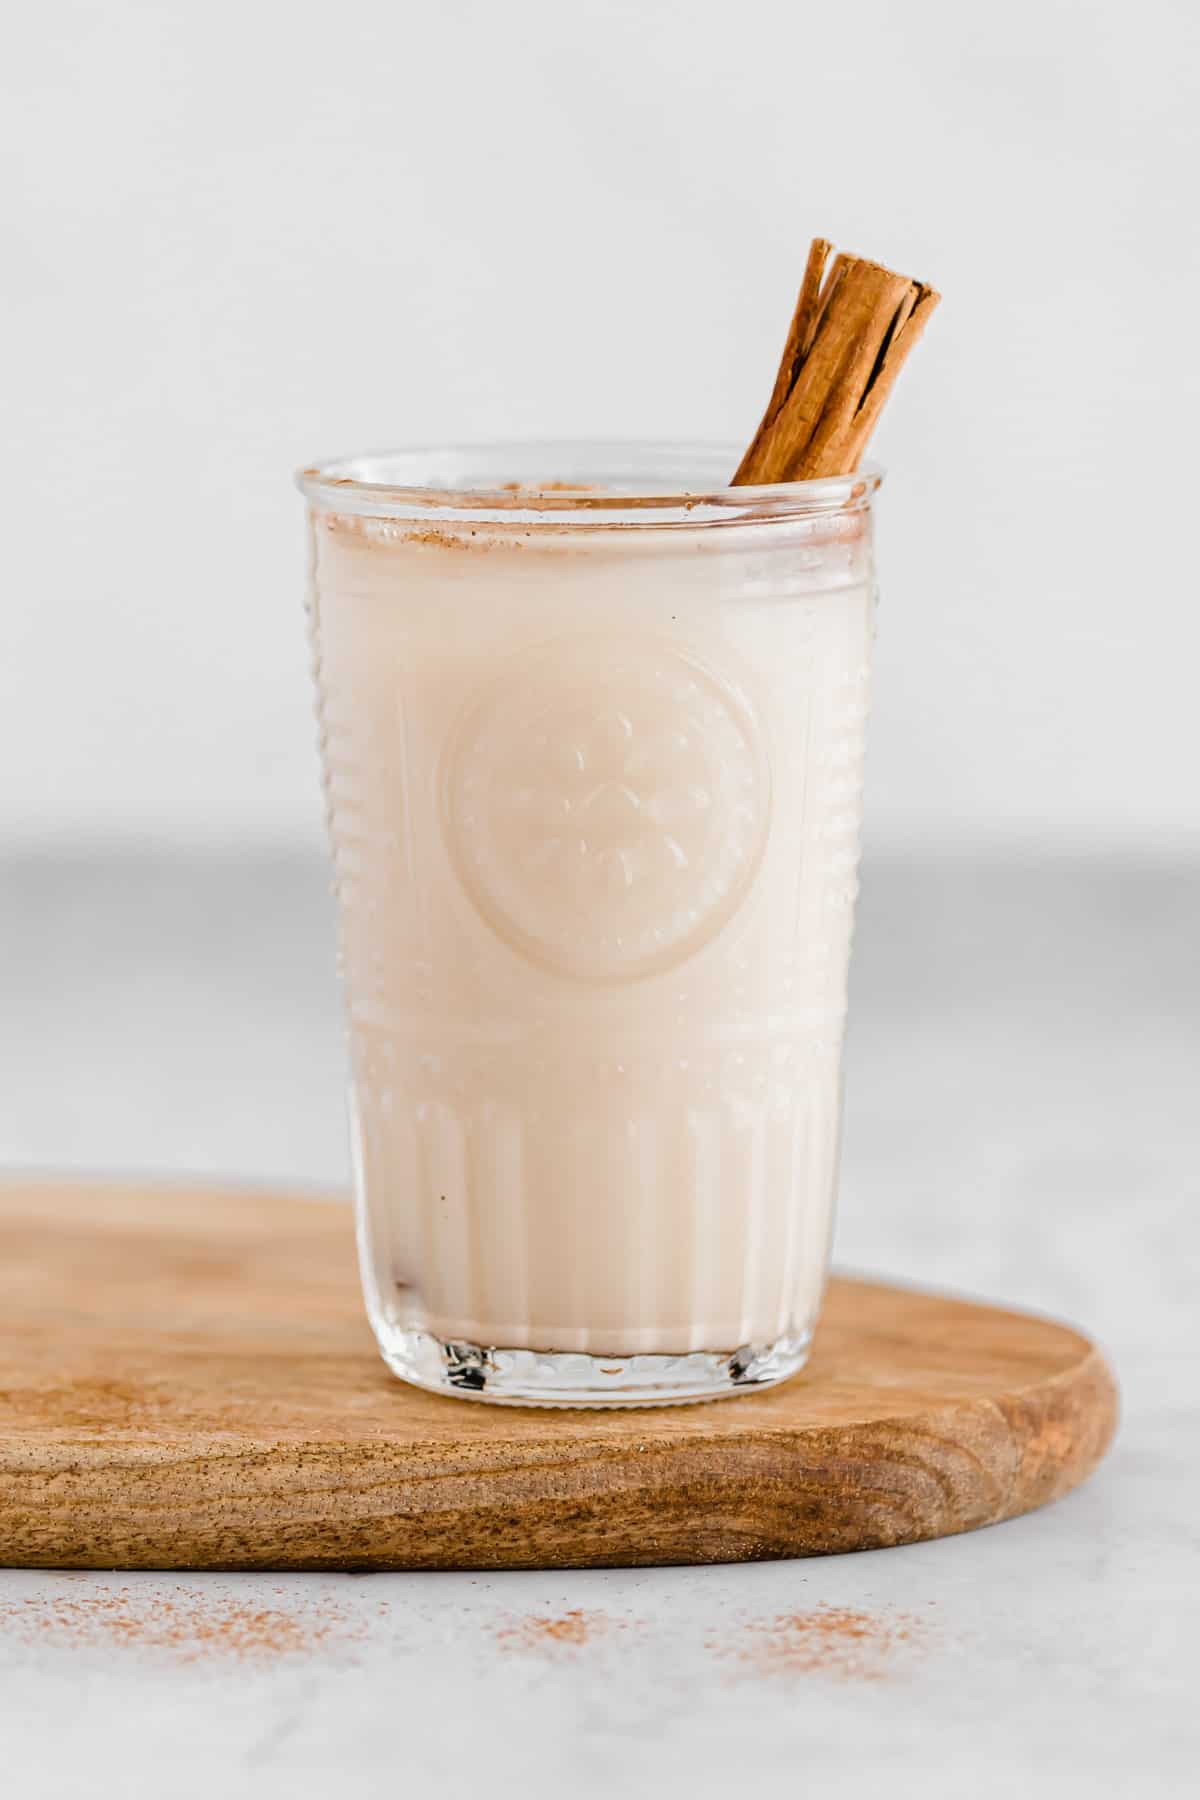 a glass with homemade horchata and a cinnamon stick